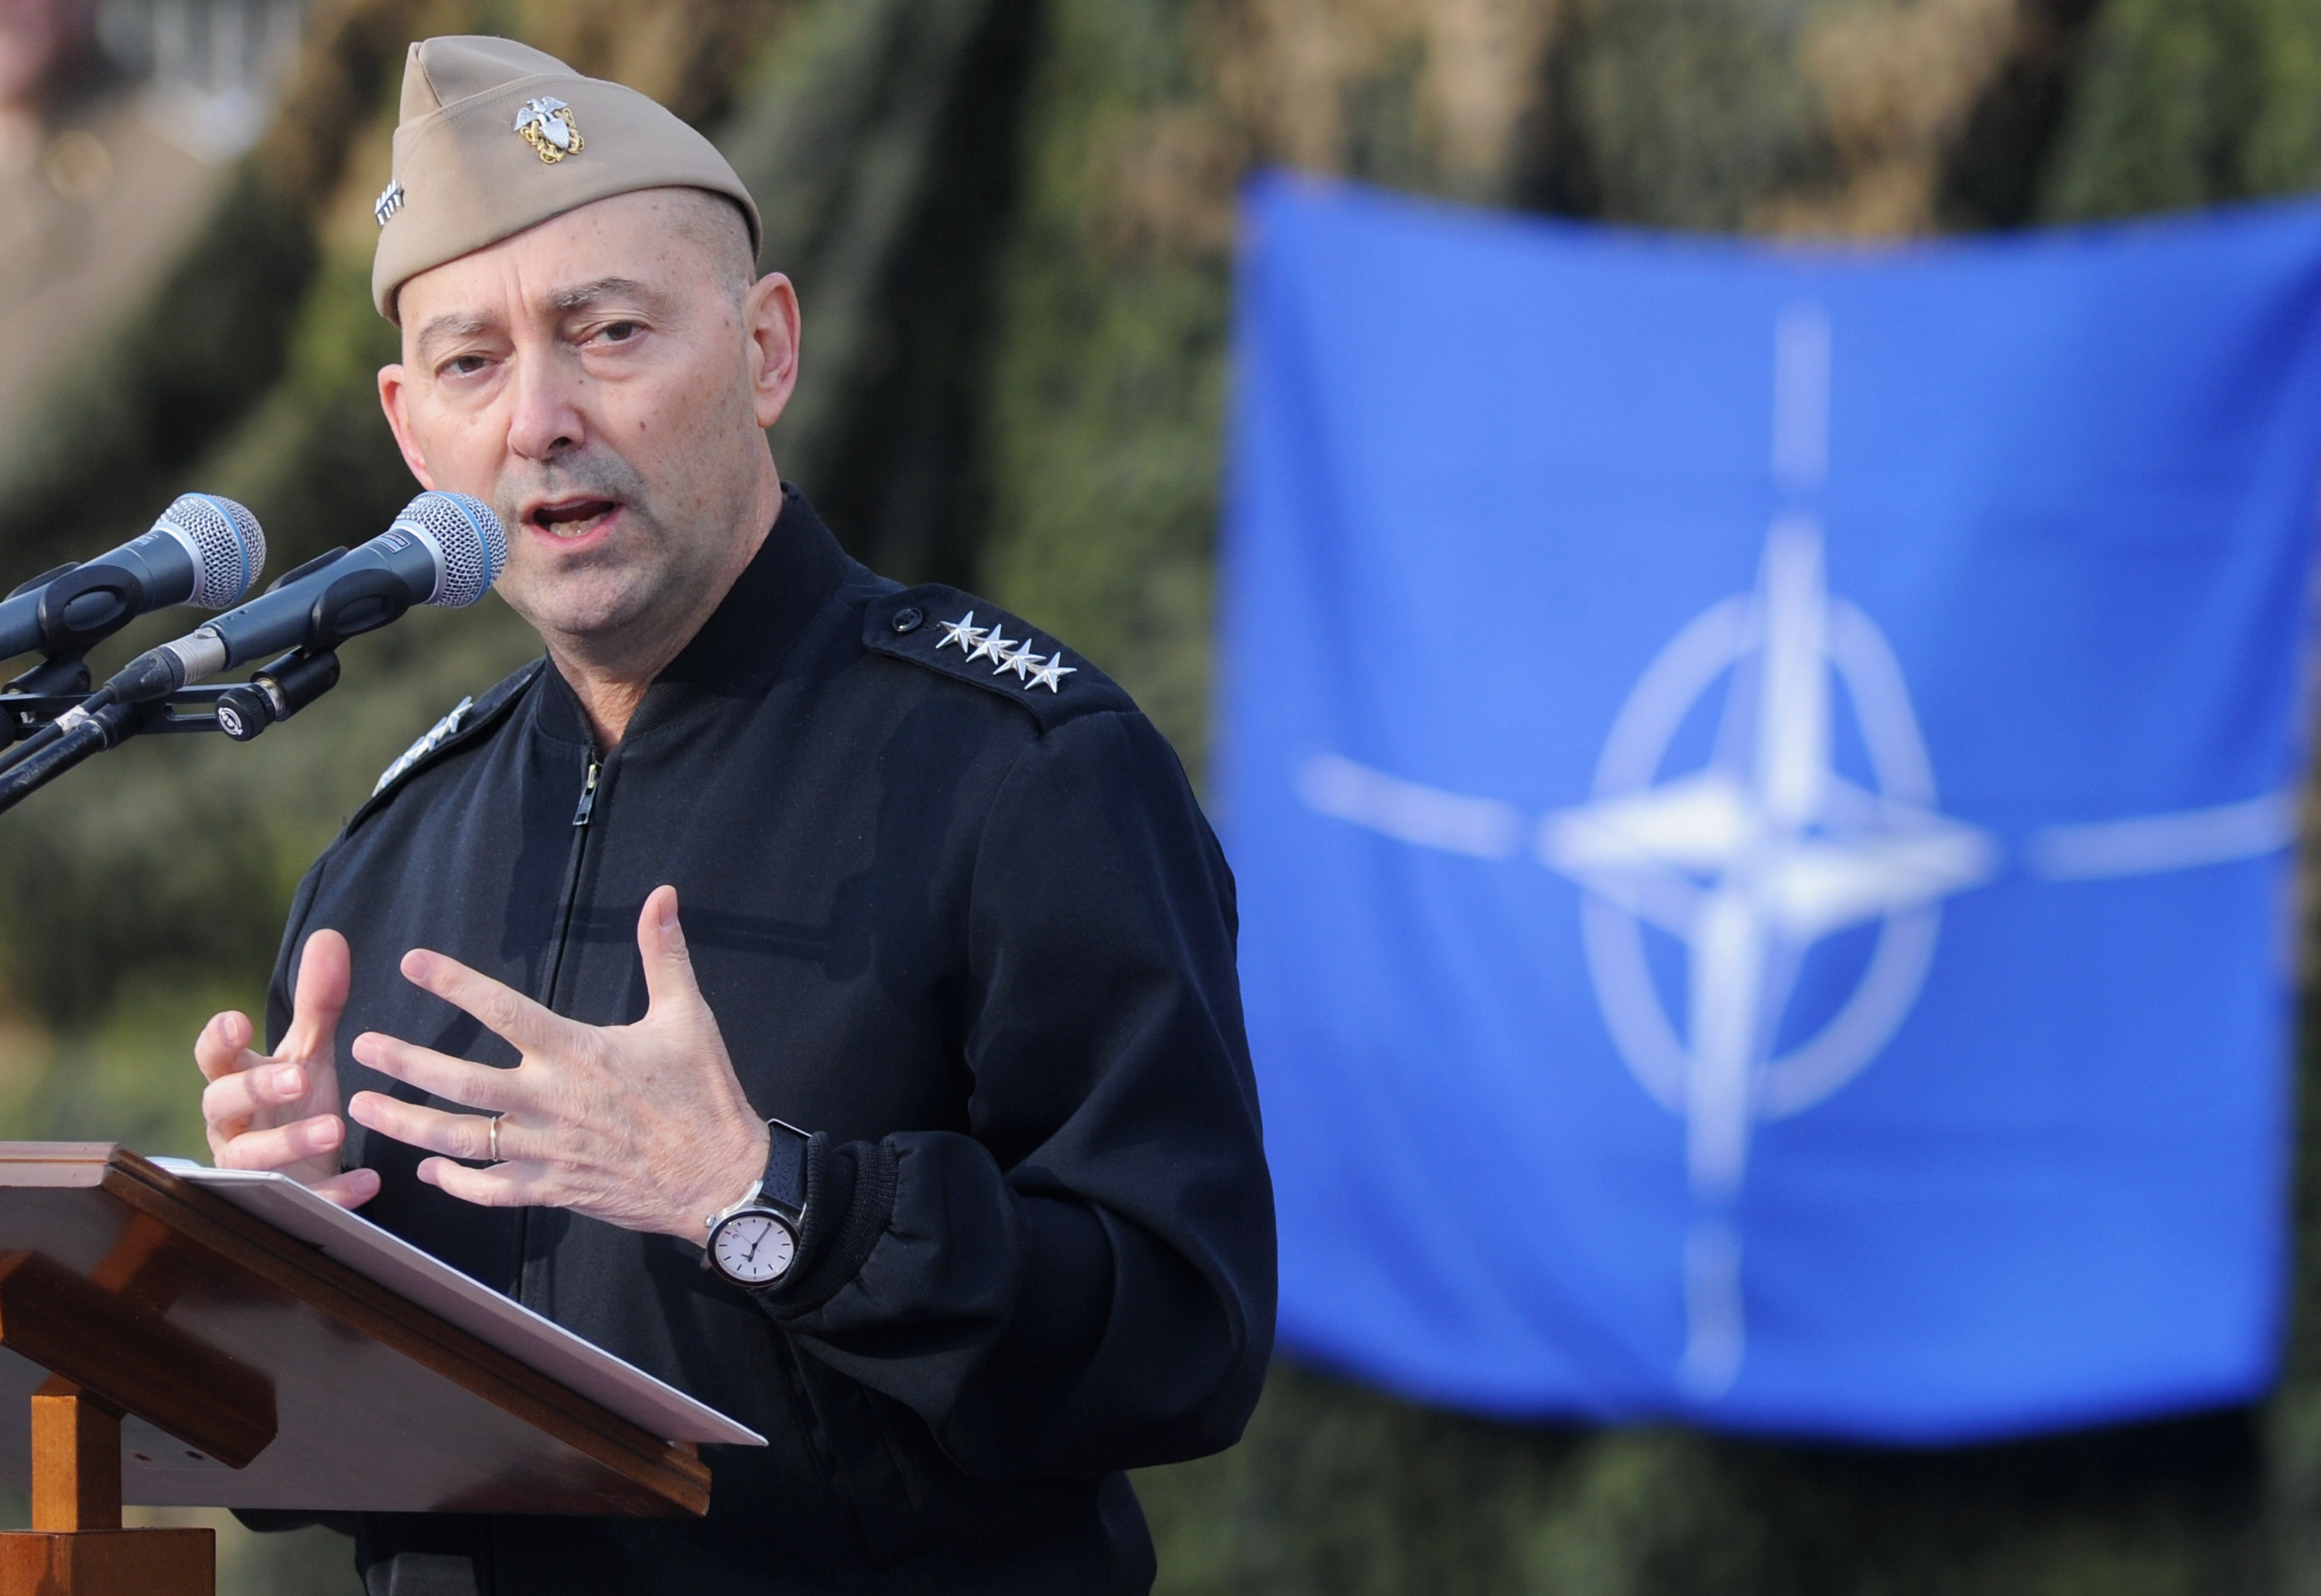 Supreme Allied Commander Europe (SACEUR) Admiral James Stavridis makes a speech at the departure ceremony for OTAN Rapid Deployable Corps - Italy bound for Afghanistan at Ugo Mara Barracks in Solbiate Olona, Italy, on Jan. 10, 2013. (Pier Marco Tacca—Getty Images)